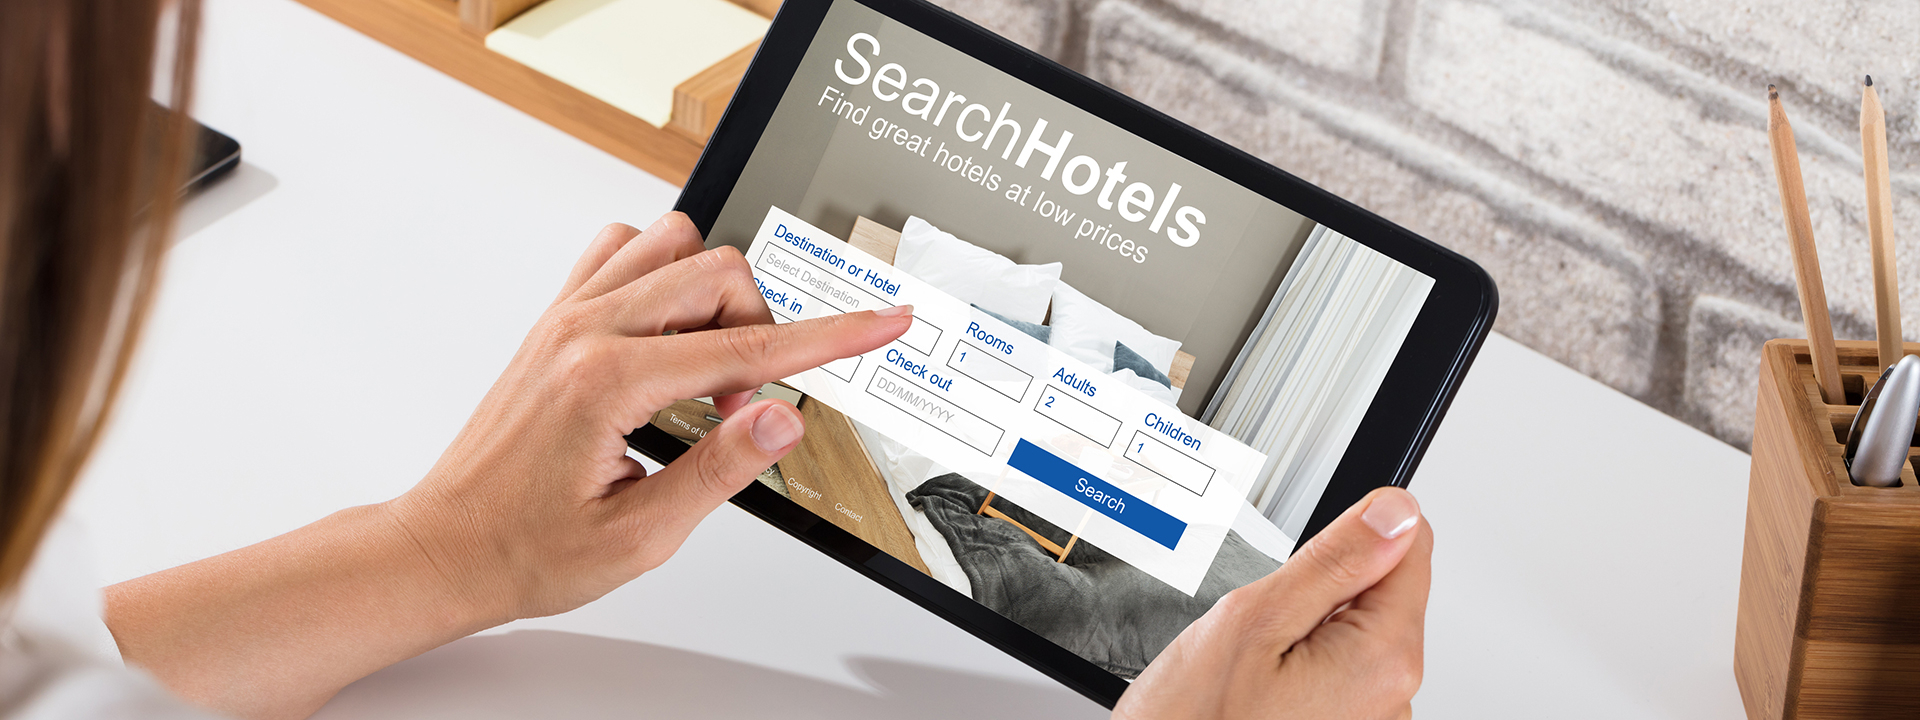 Tips for Profitable Hotels in 2016